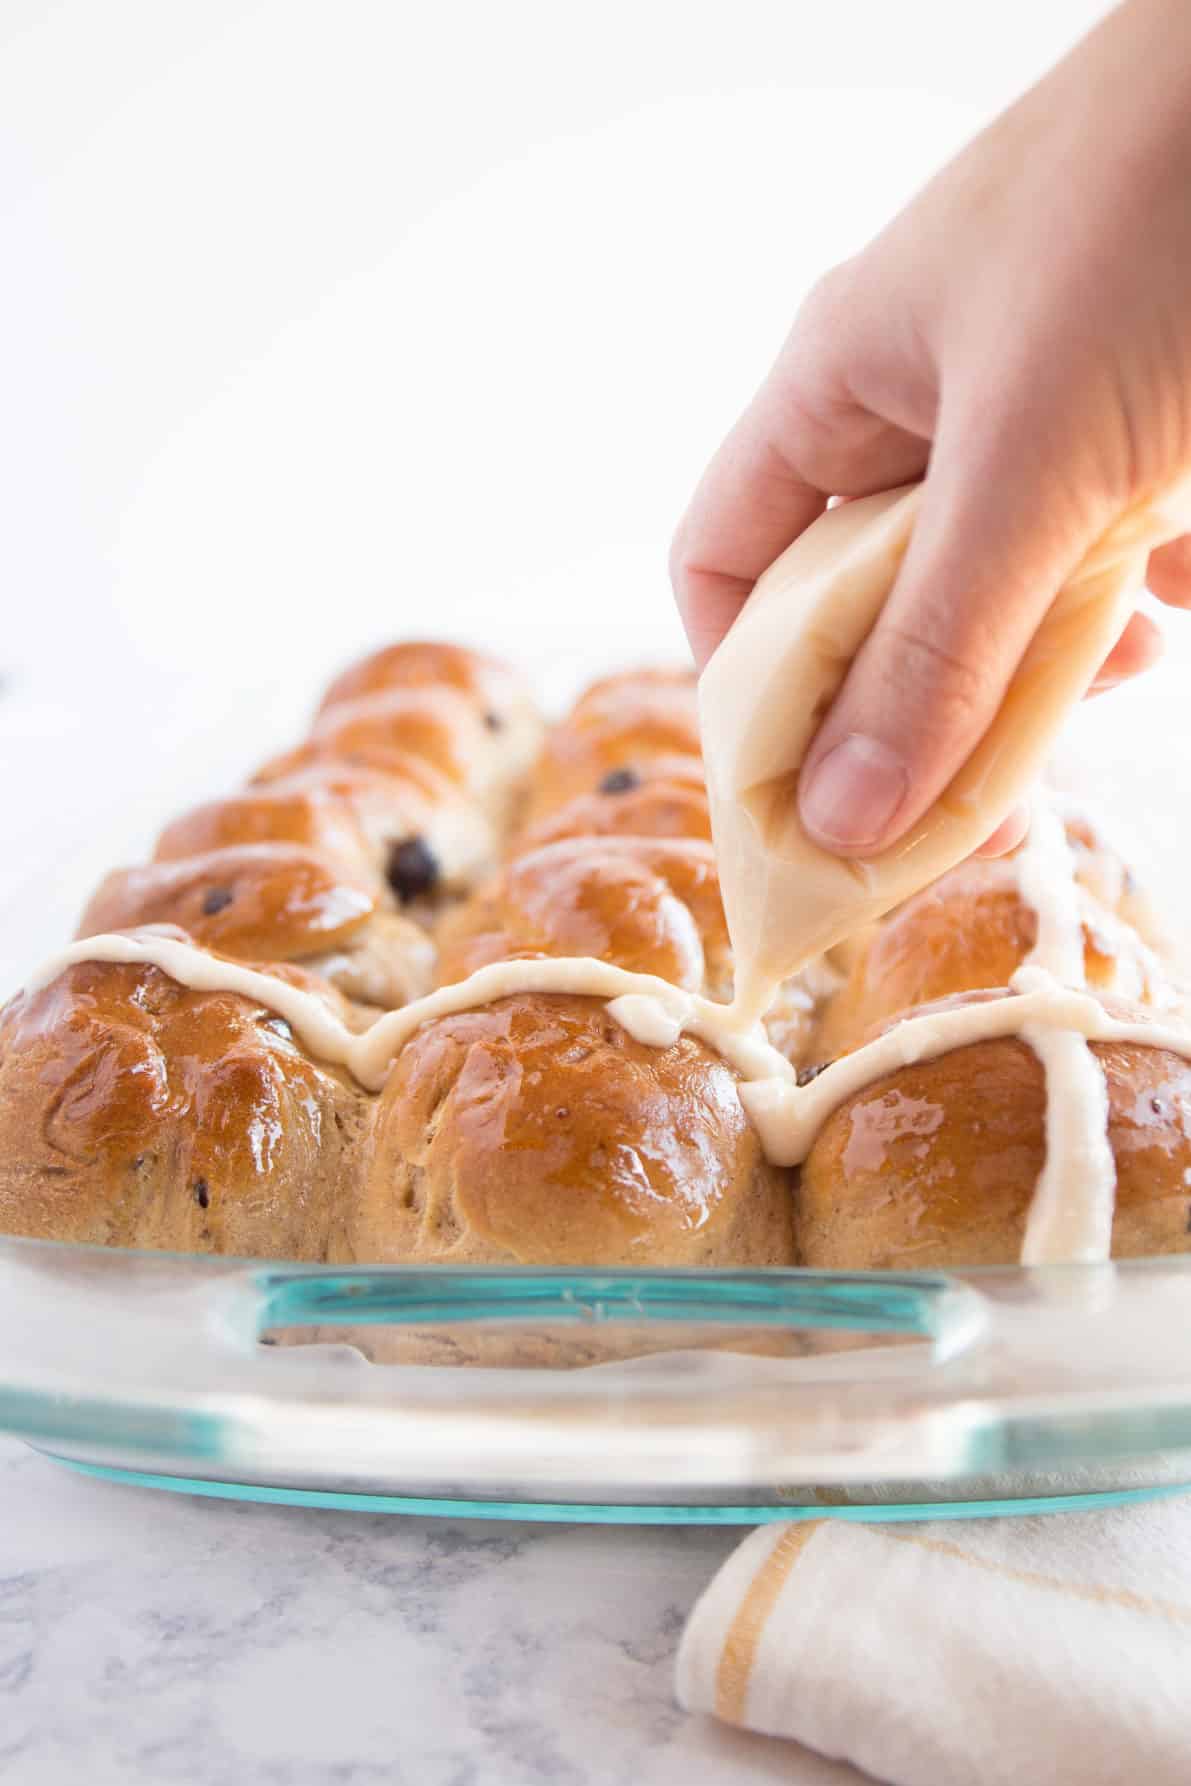 Hot Cross Buns that are being iced with cream cheese icing.